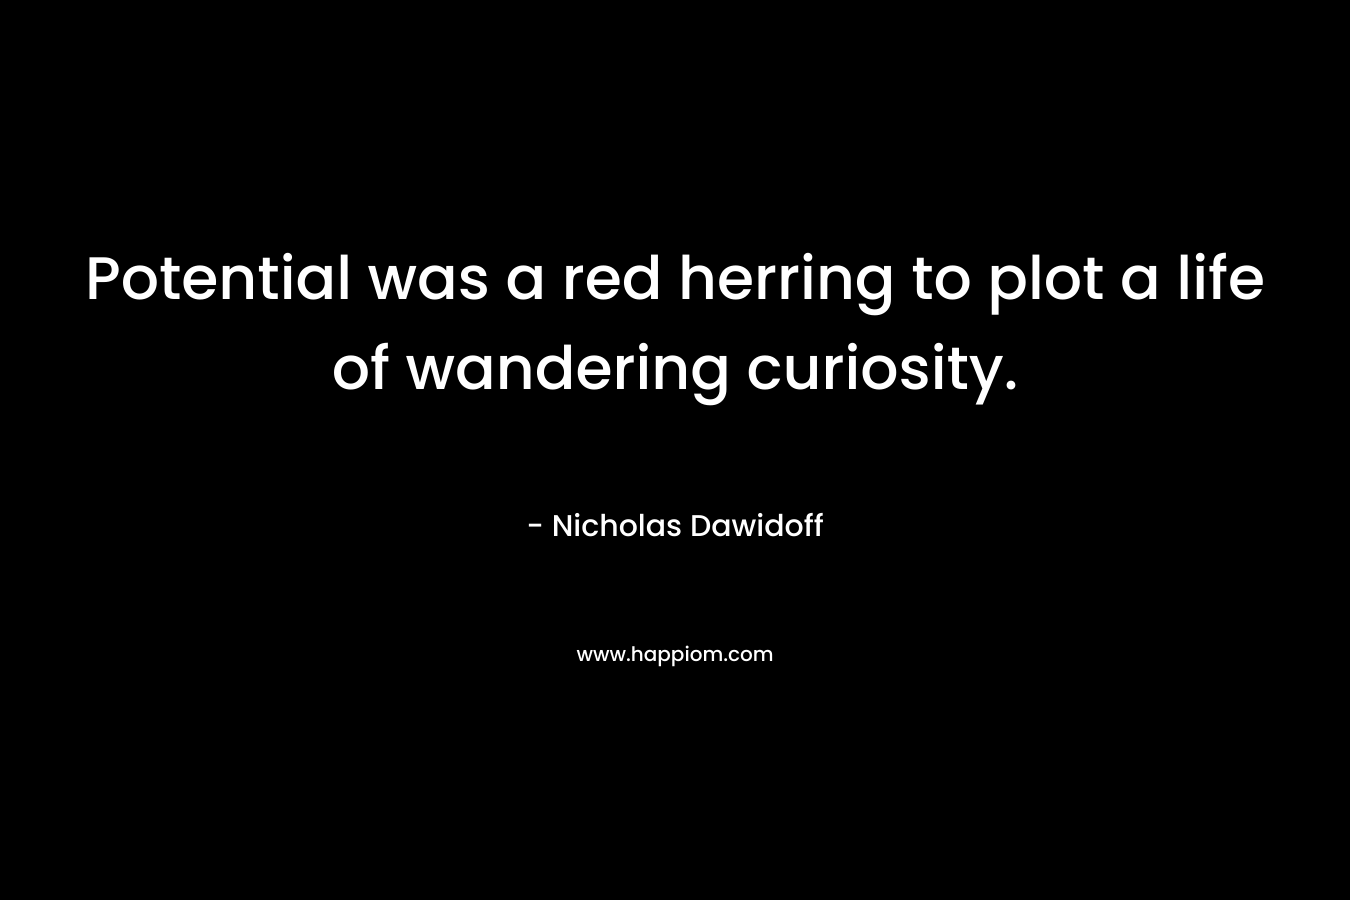 Potential was a red herring to plot a life of wandering curiosity. – Nicholas Dawidoff